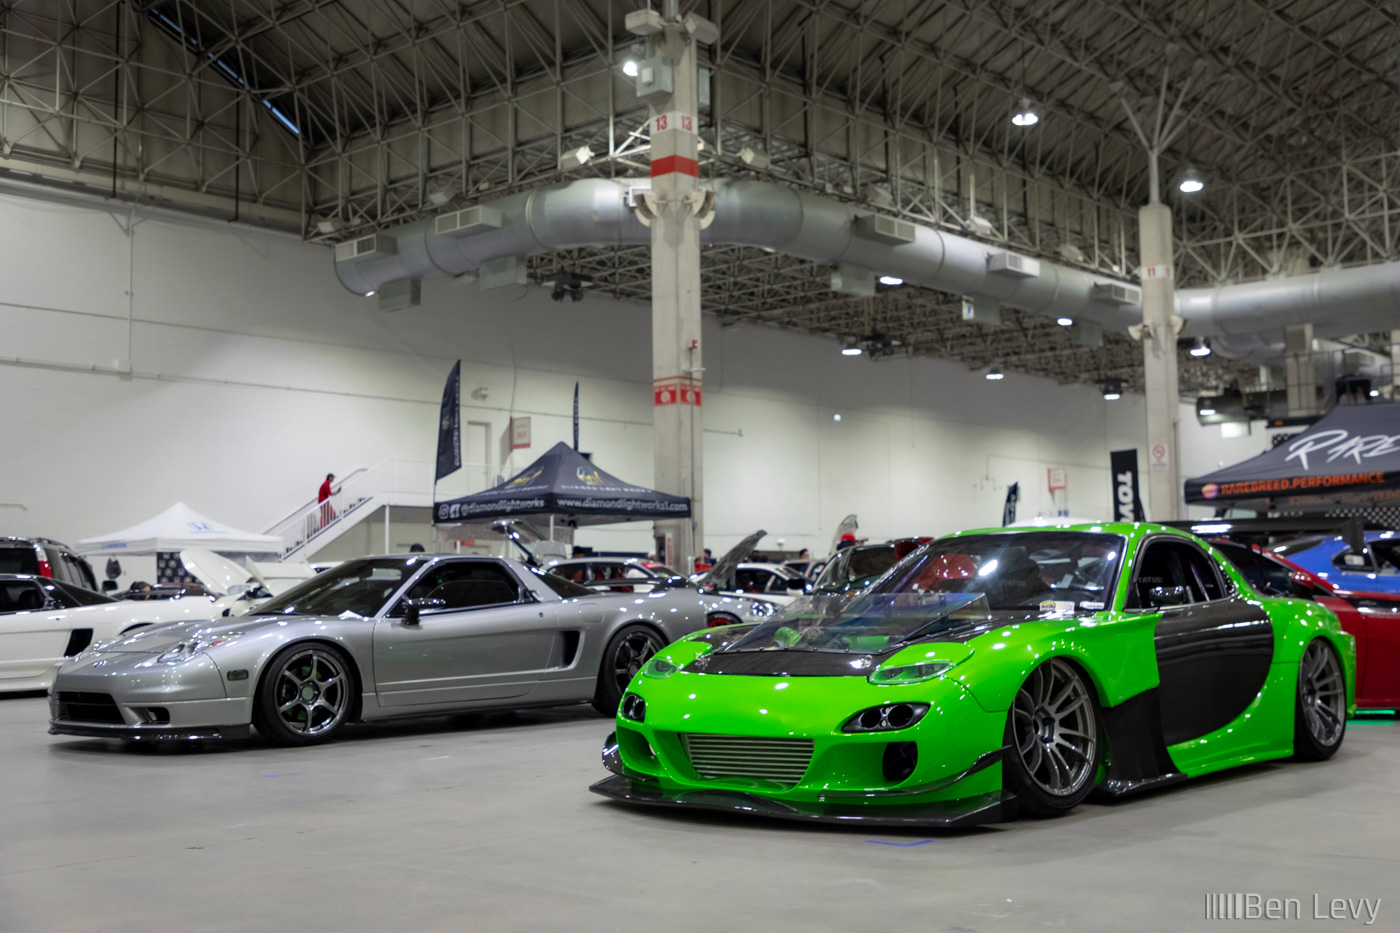 Acura NSX and Mazda RX-7 at Wekfest Chicago